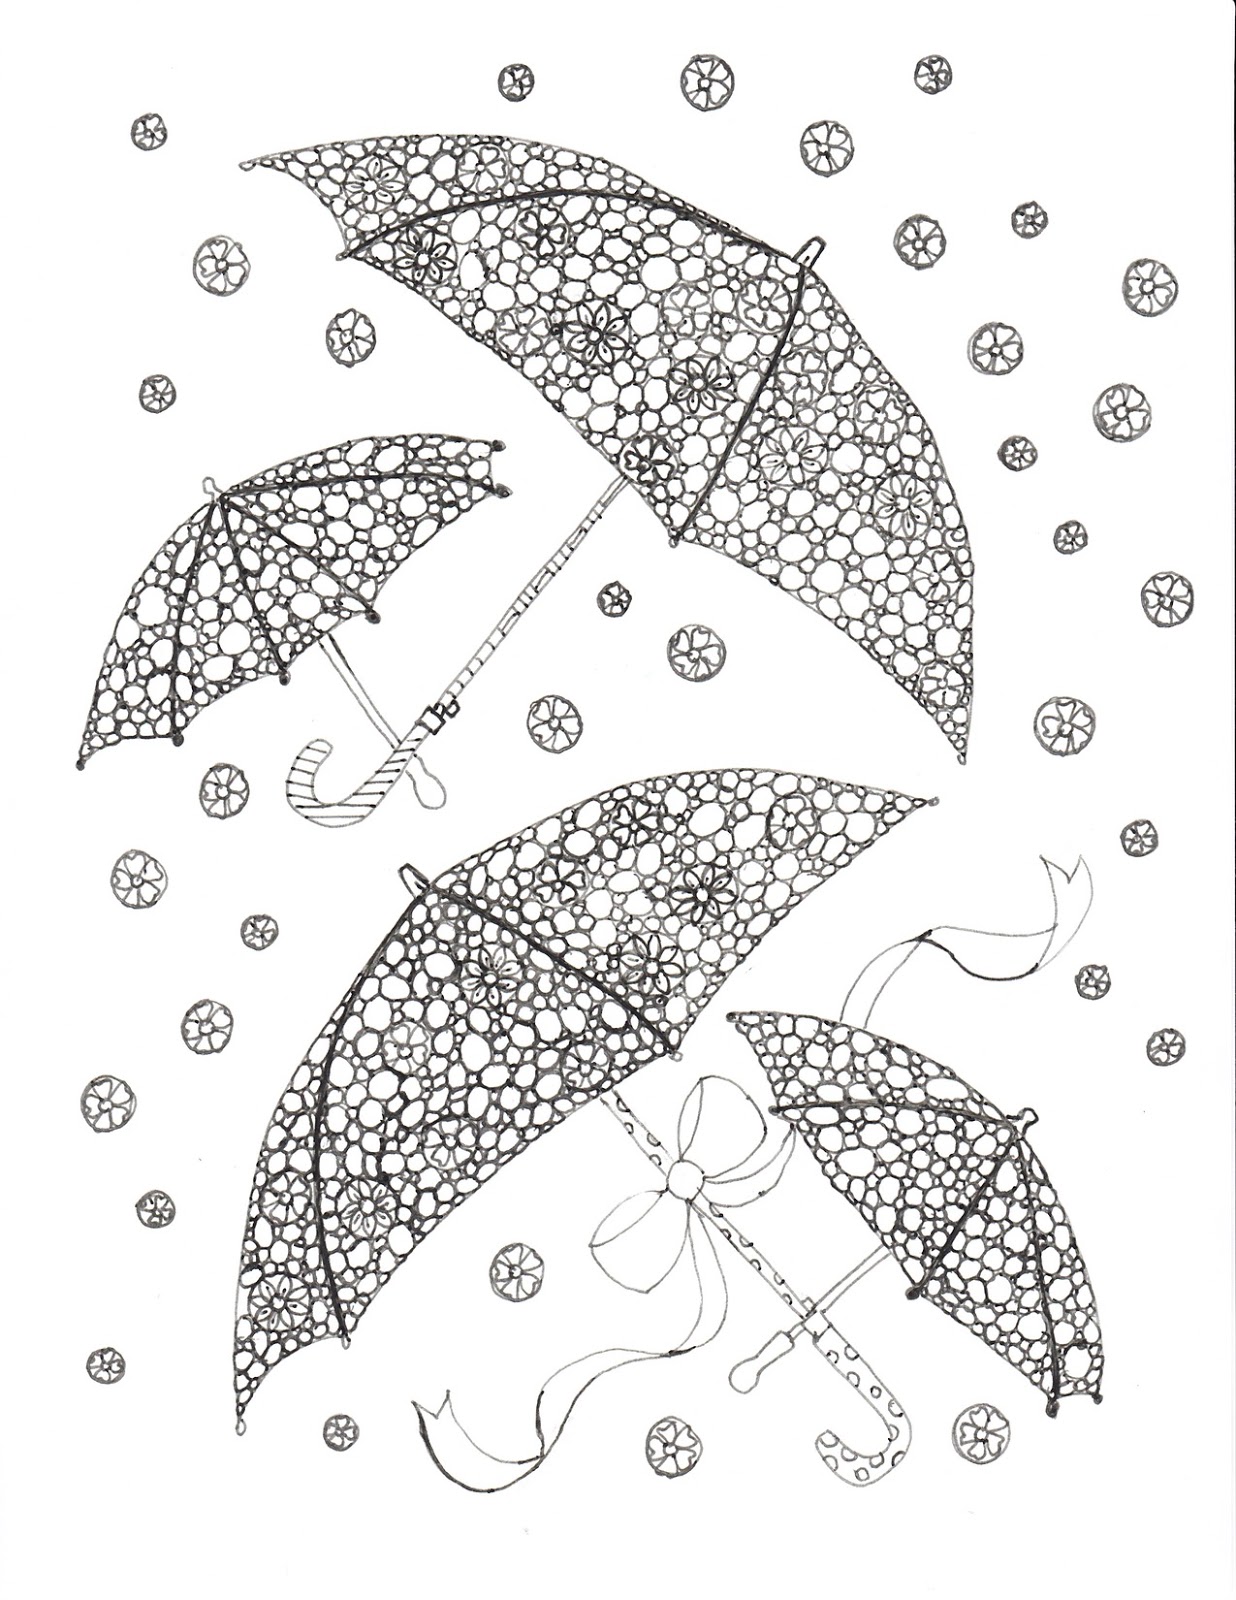 coloring pages for april showers